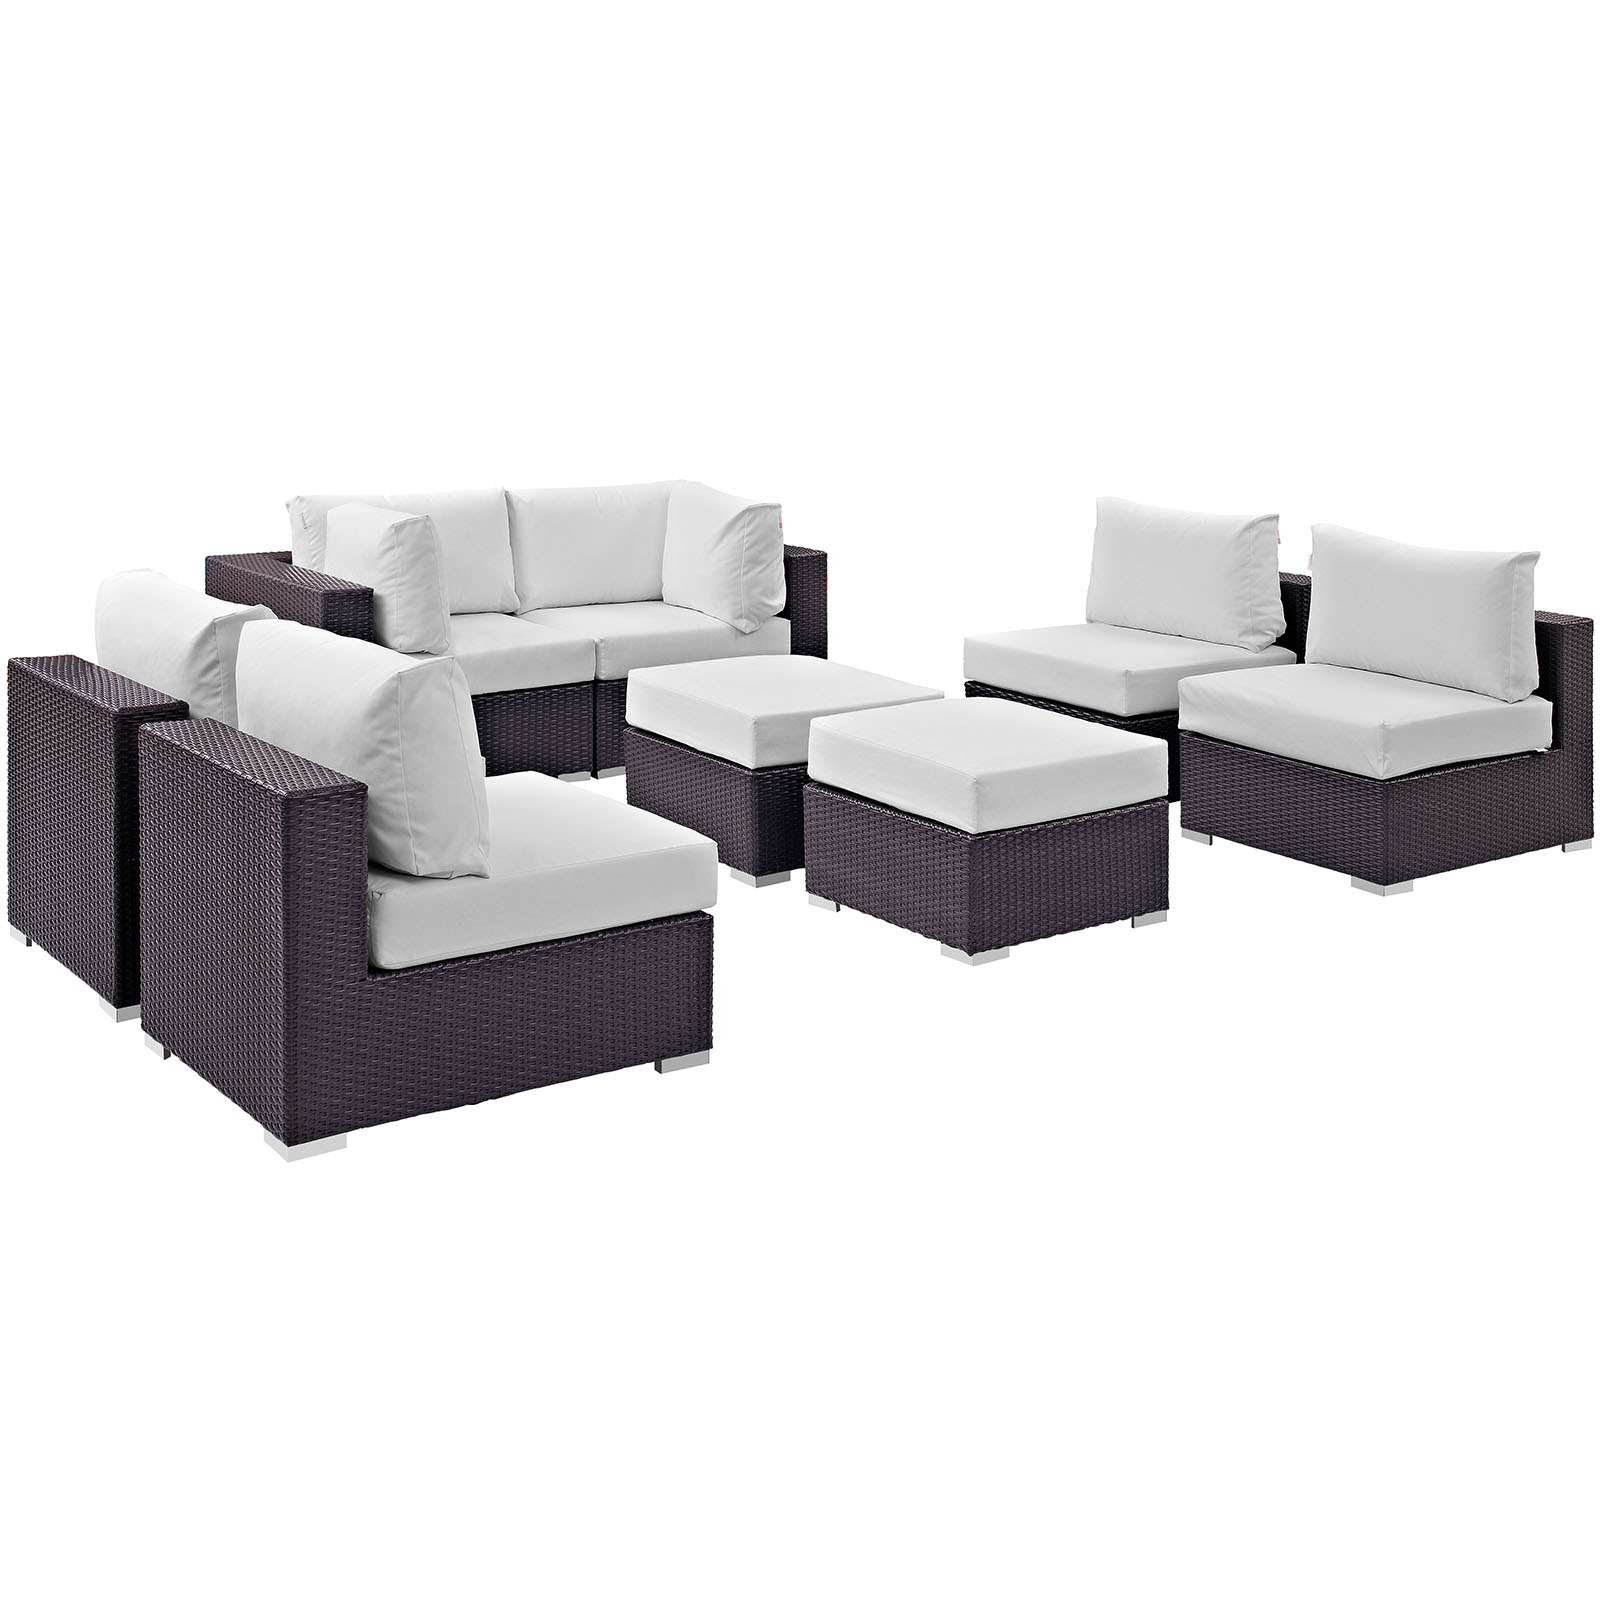 Modway Convene 8 Piece Outdoor Patio Sectional Set in Espresso White - image 2 of 7